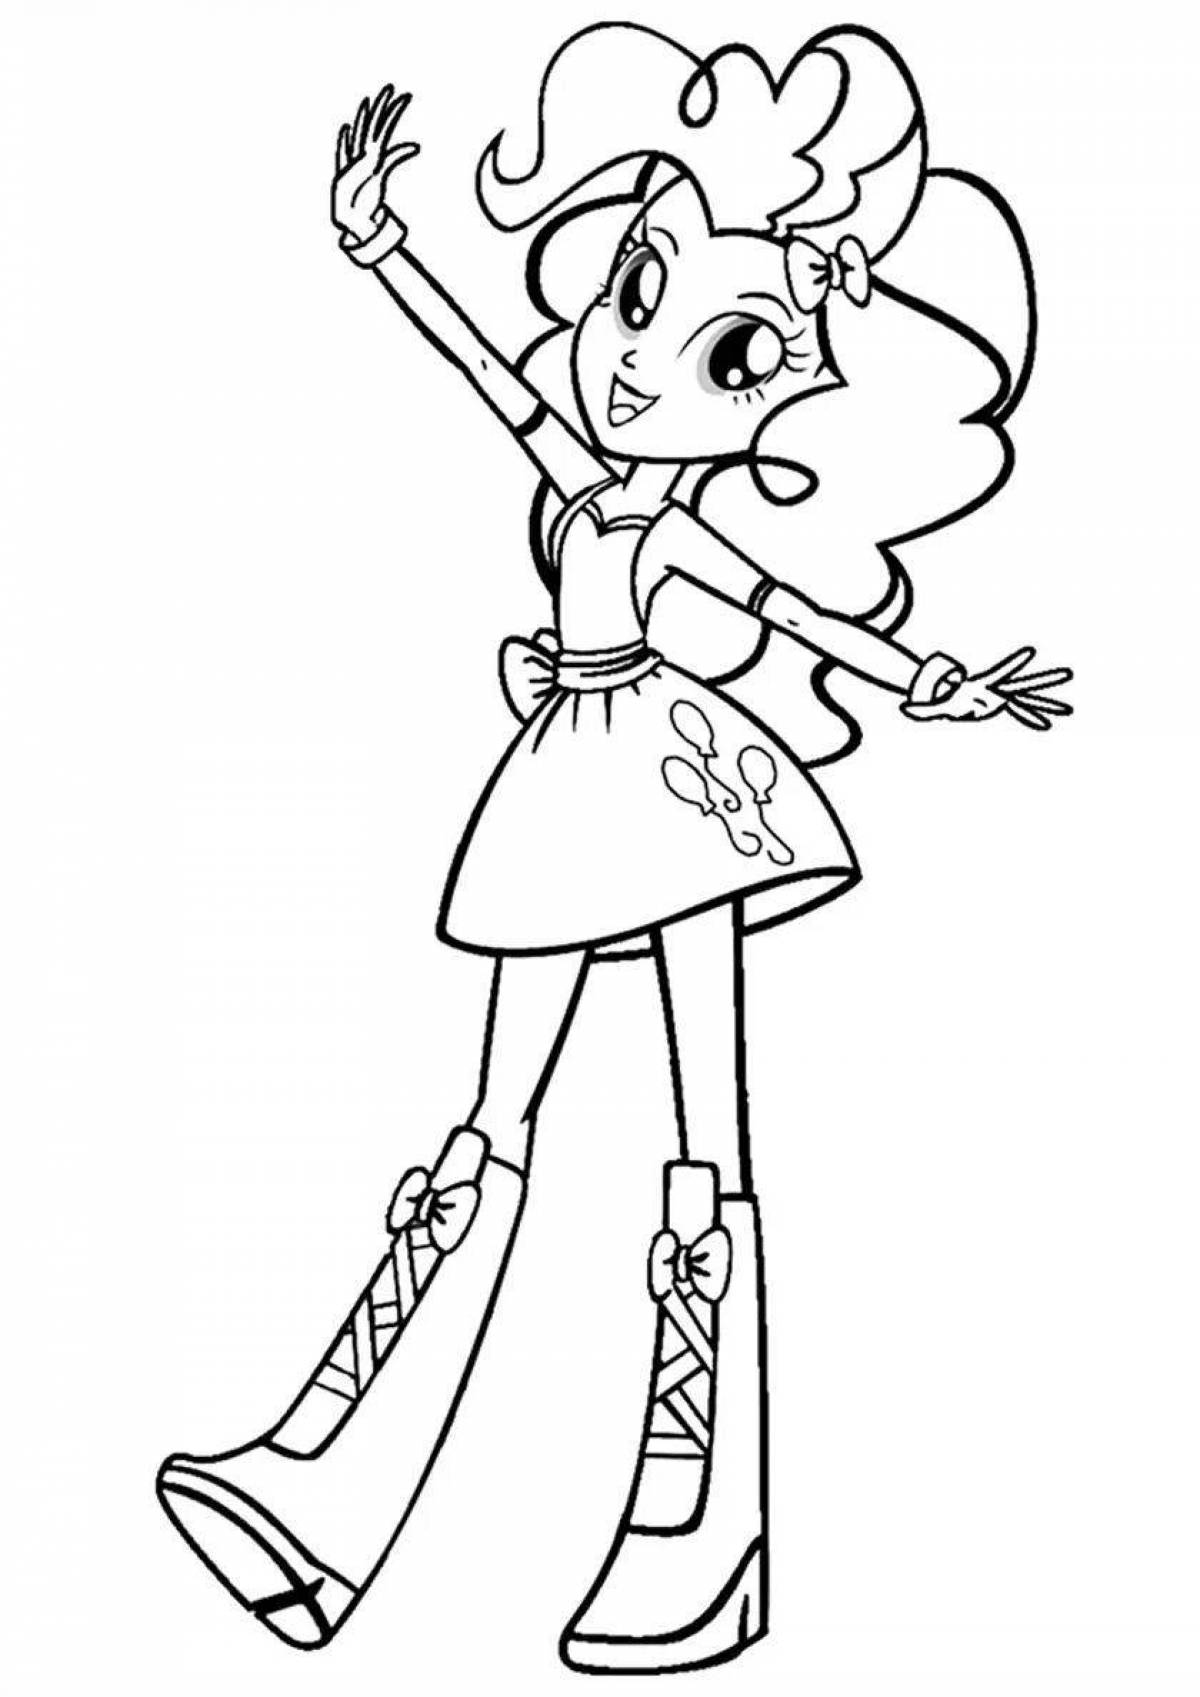 Coloring pinkie pie from magical equestria girls